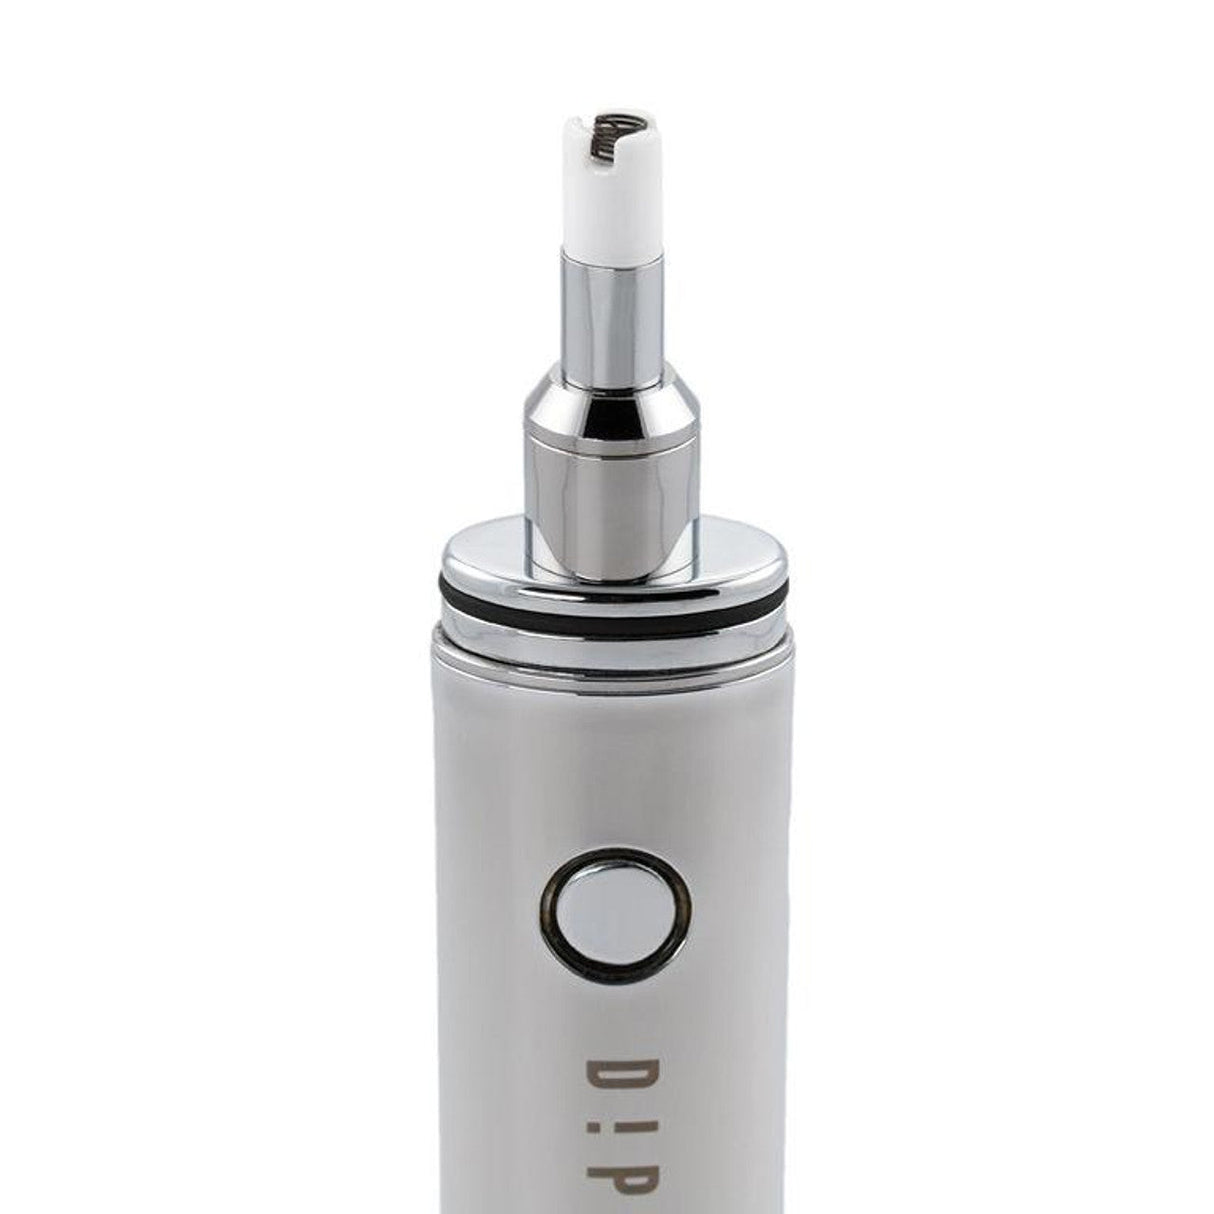 Dipper Vaporizer by Dip Devices with Quartz Tip for Concentrates, Front View on White Background